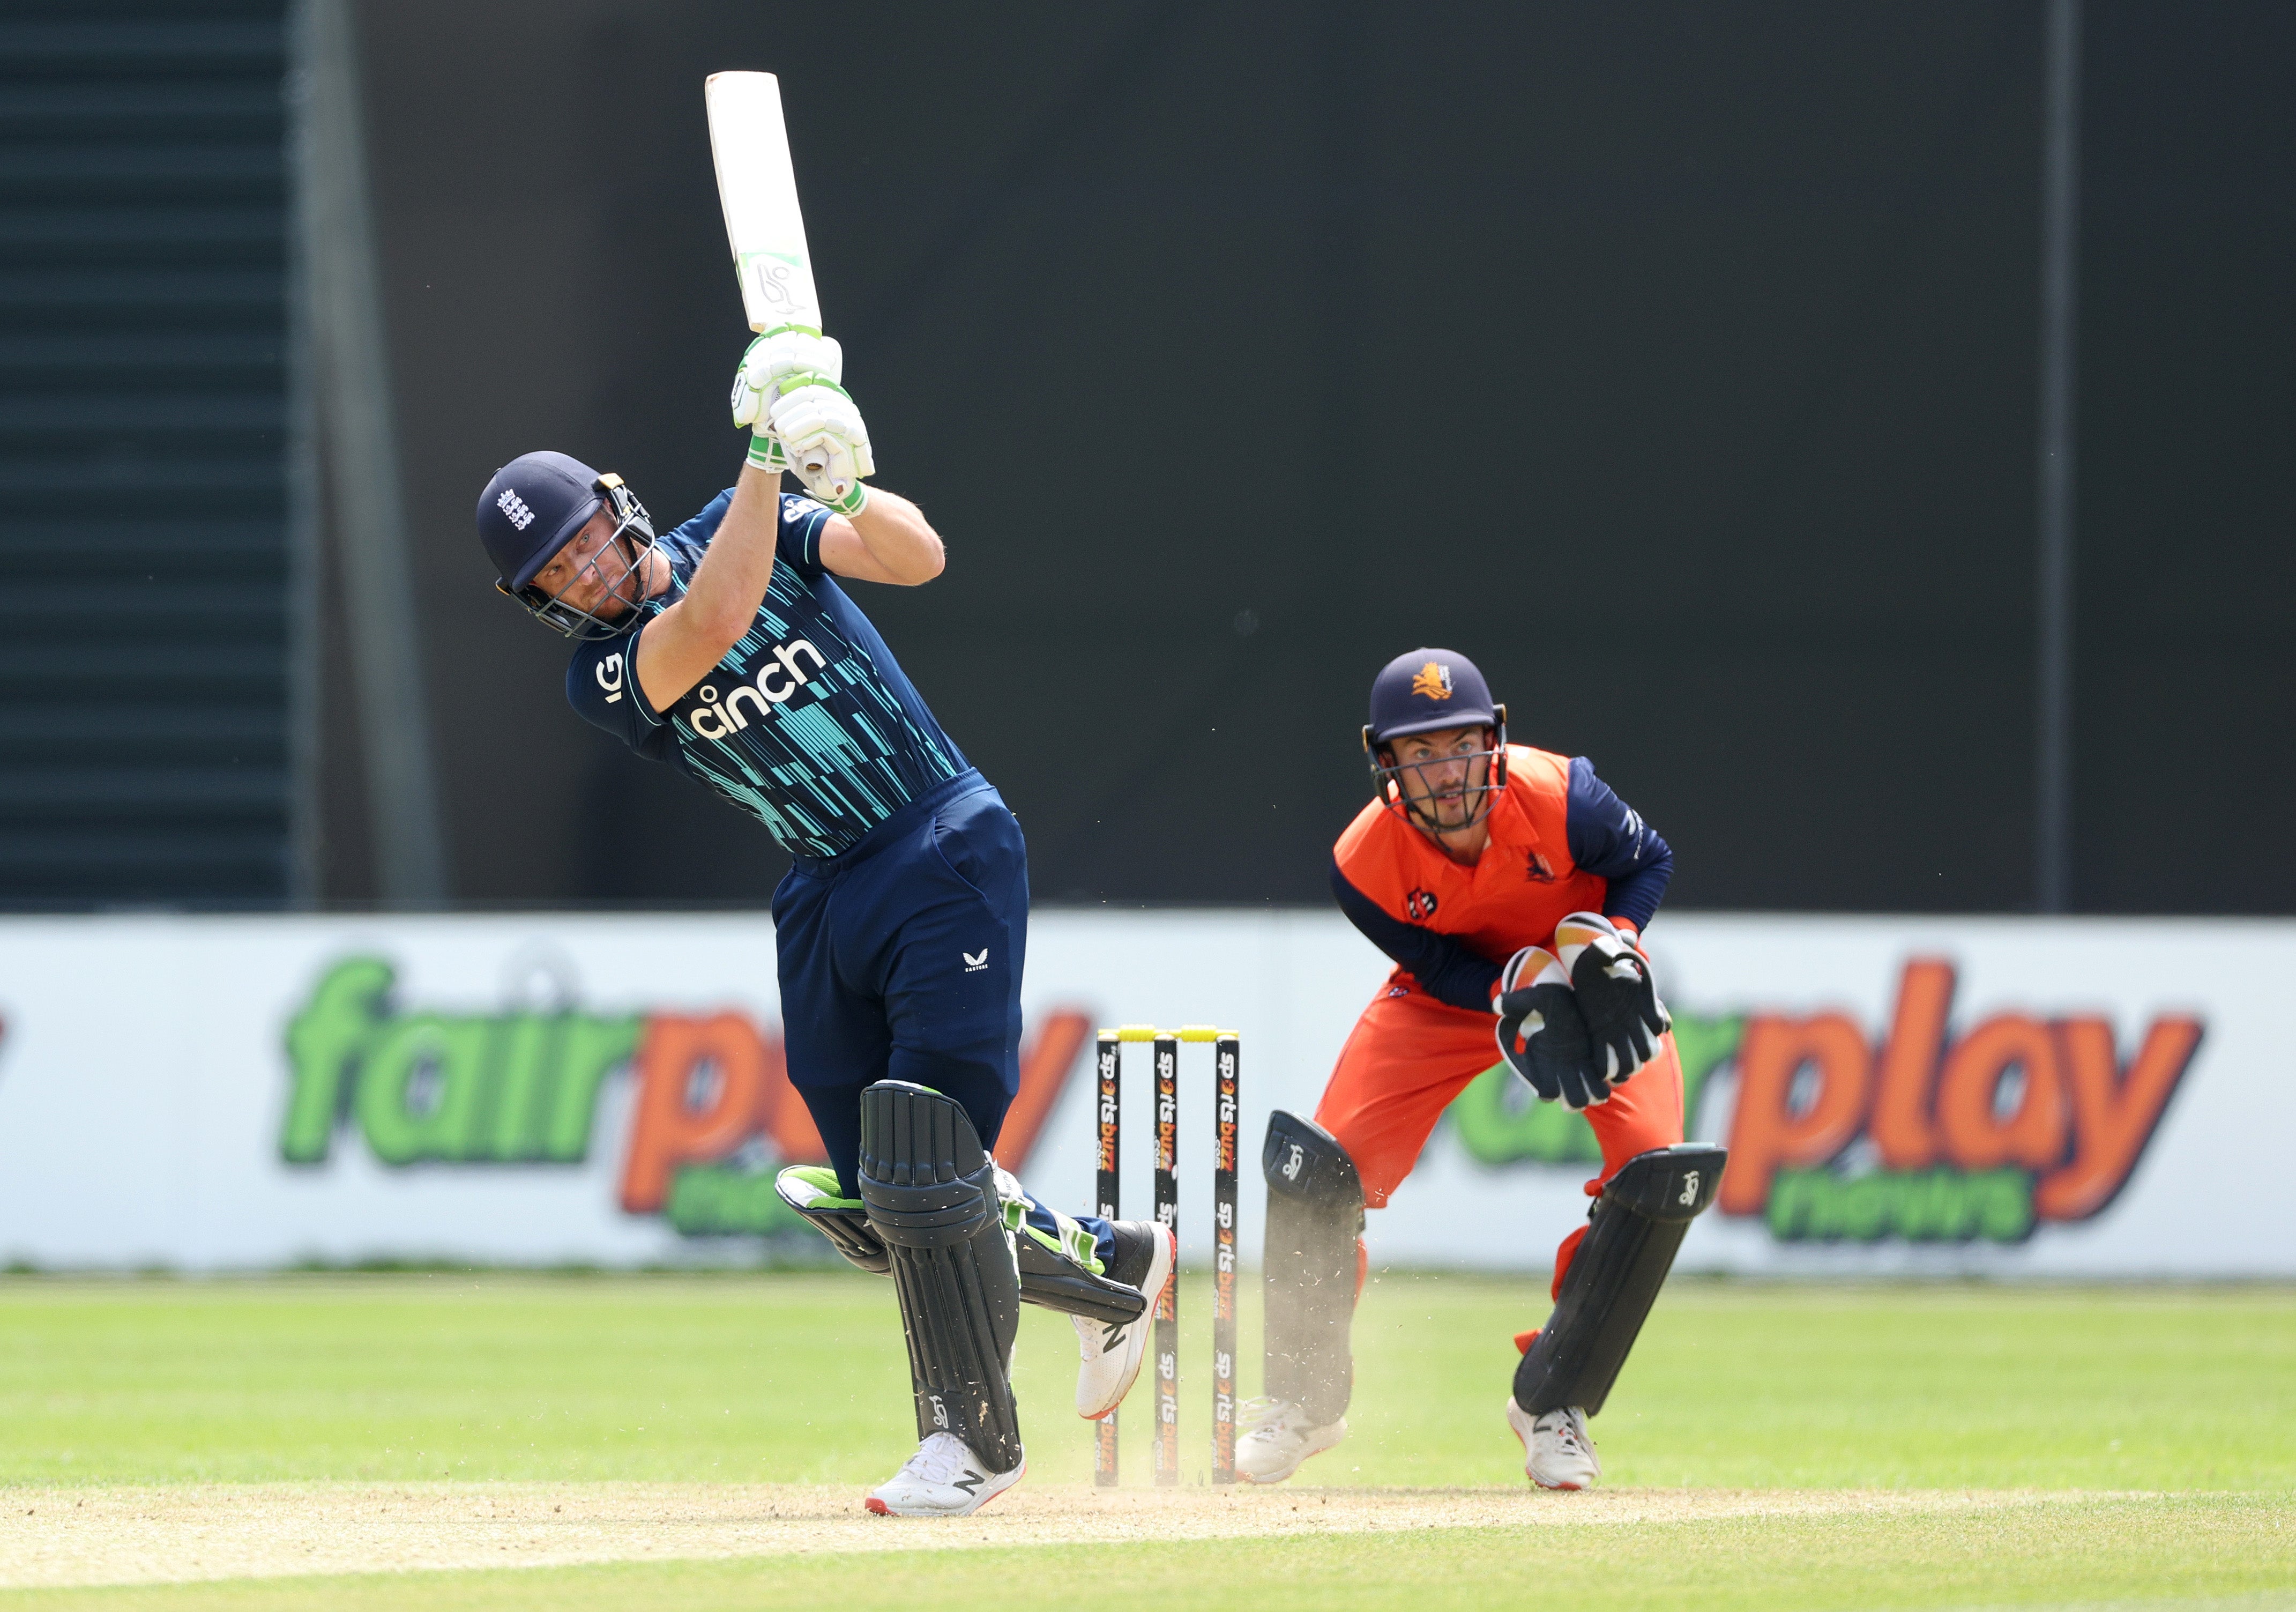 Netherlands vs England LIVE Cricket updates as England hit world record ODI score The Independent